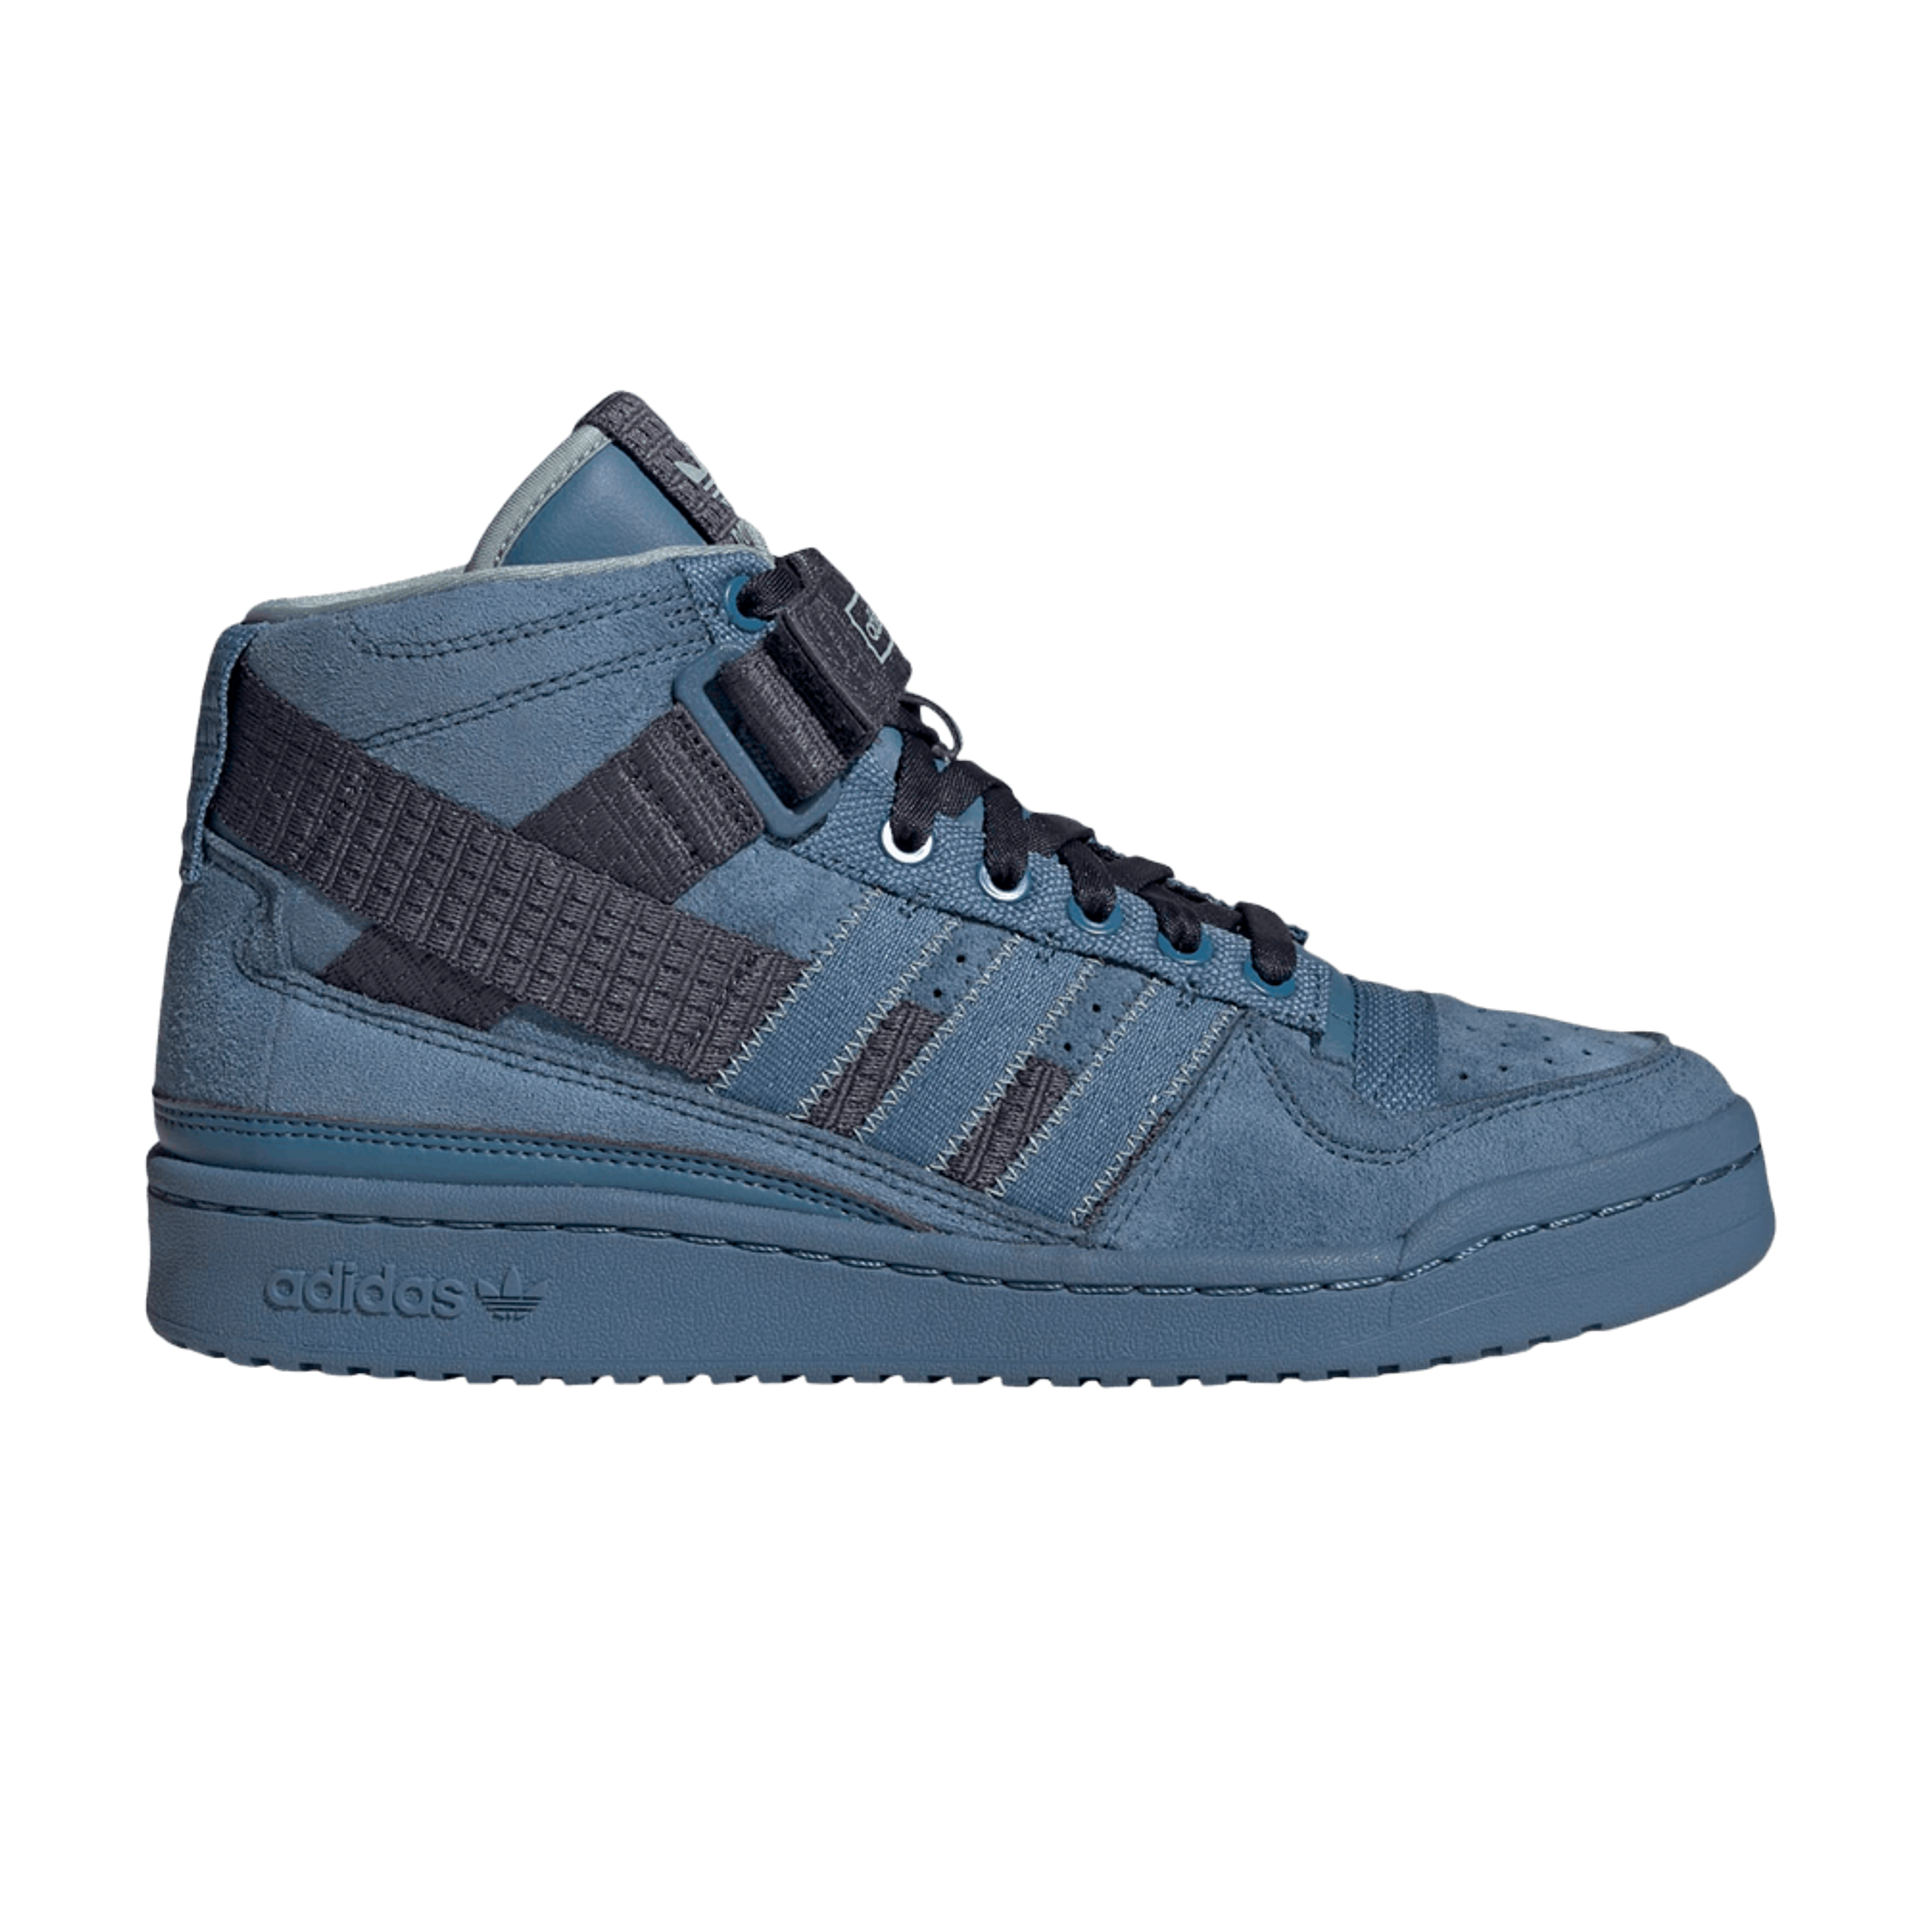 Parley x adidas Forum Mid 'Altered Blue'